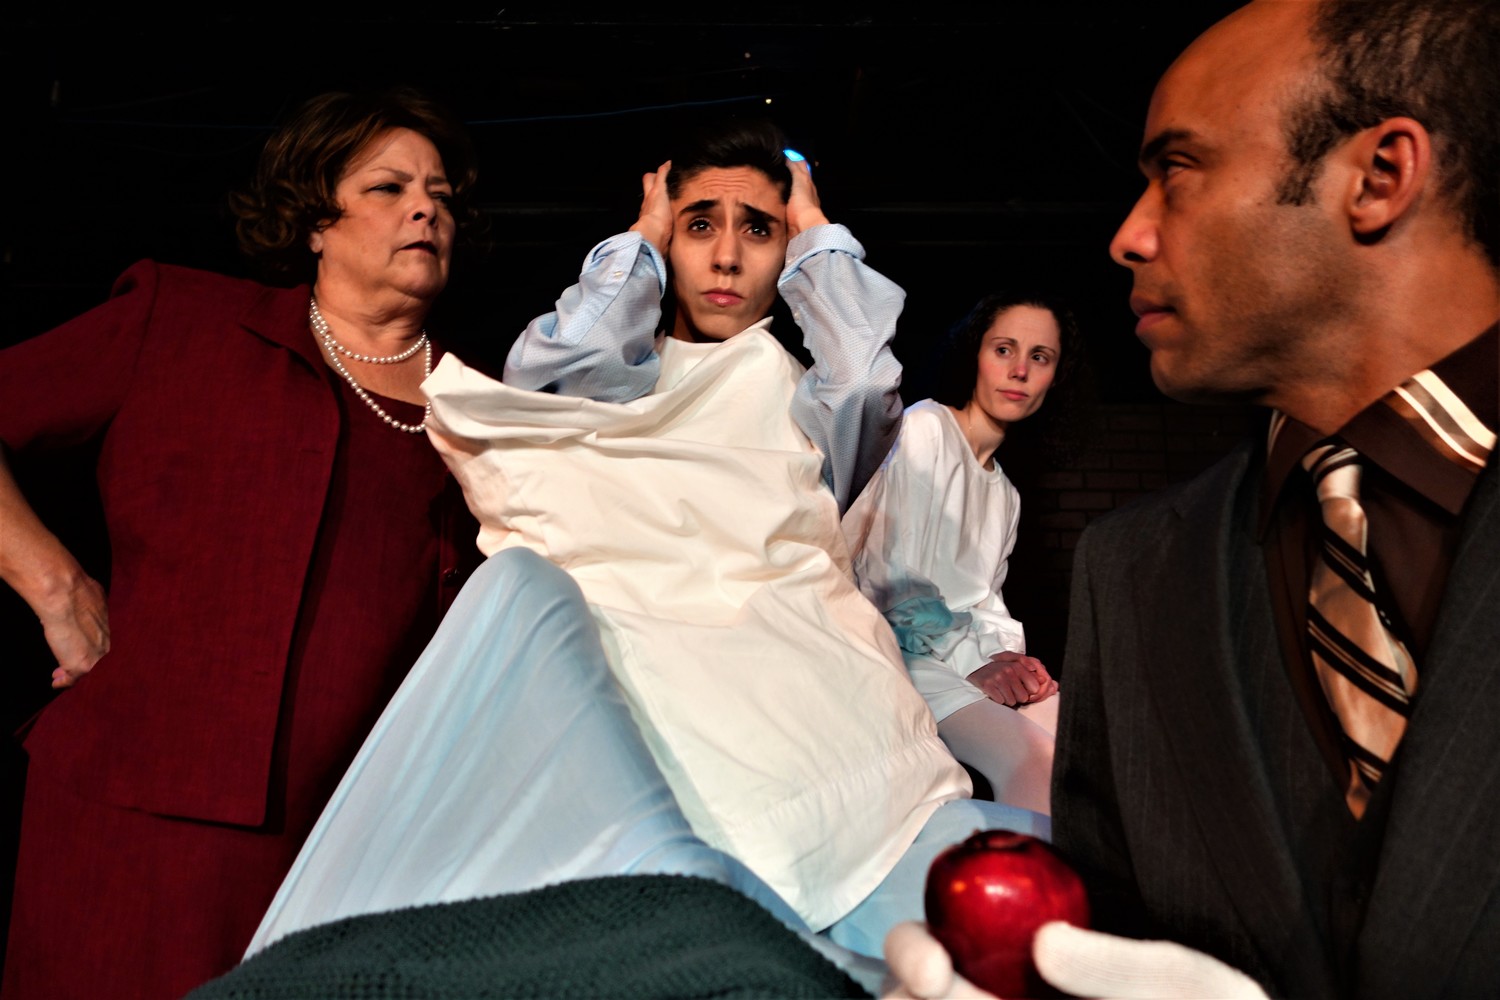 Theatre Three 20th ANNUAL FESTIVAL OF ONE-ACT PLAYS Counting Sheep by Jae Kramisen clockwise Antoine Jones, Kate Keating, Joan St. Onge, Jacqueline M. Hughes. Photo credit Peter Lanscombe. 